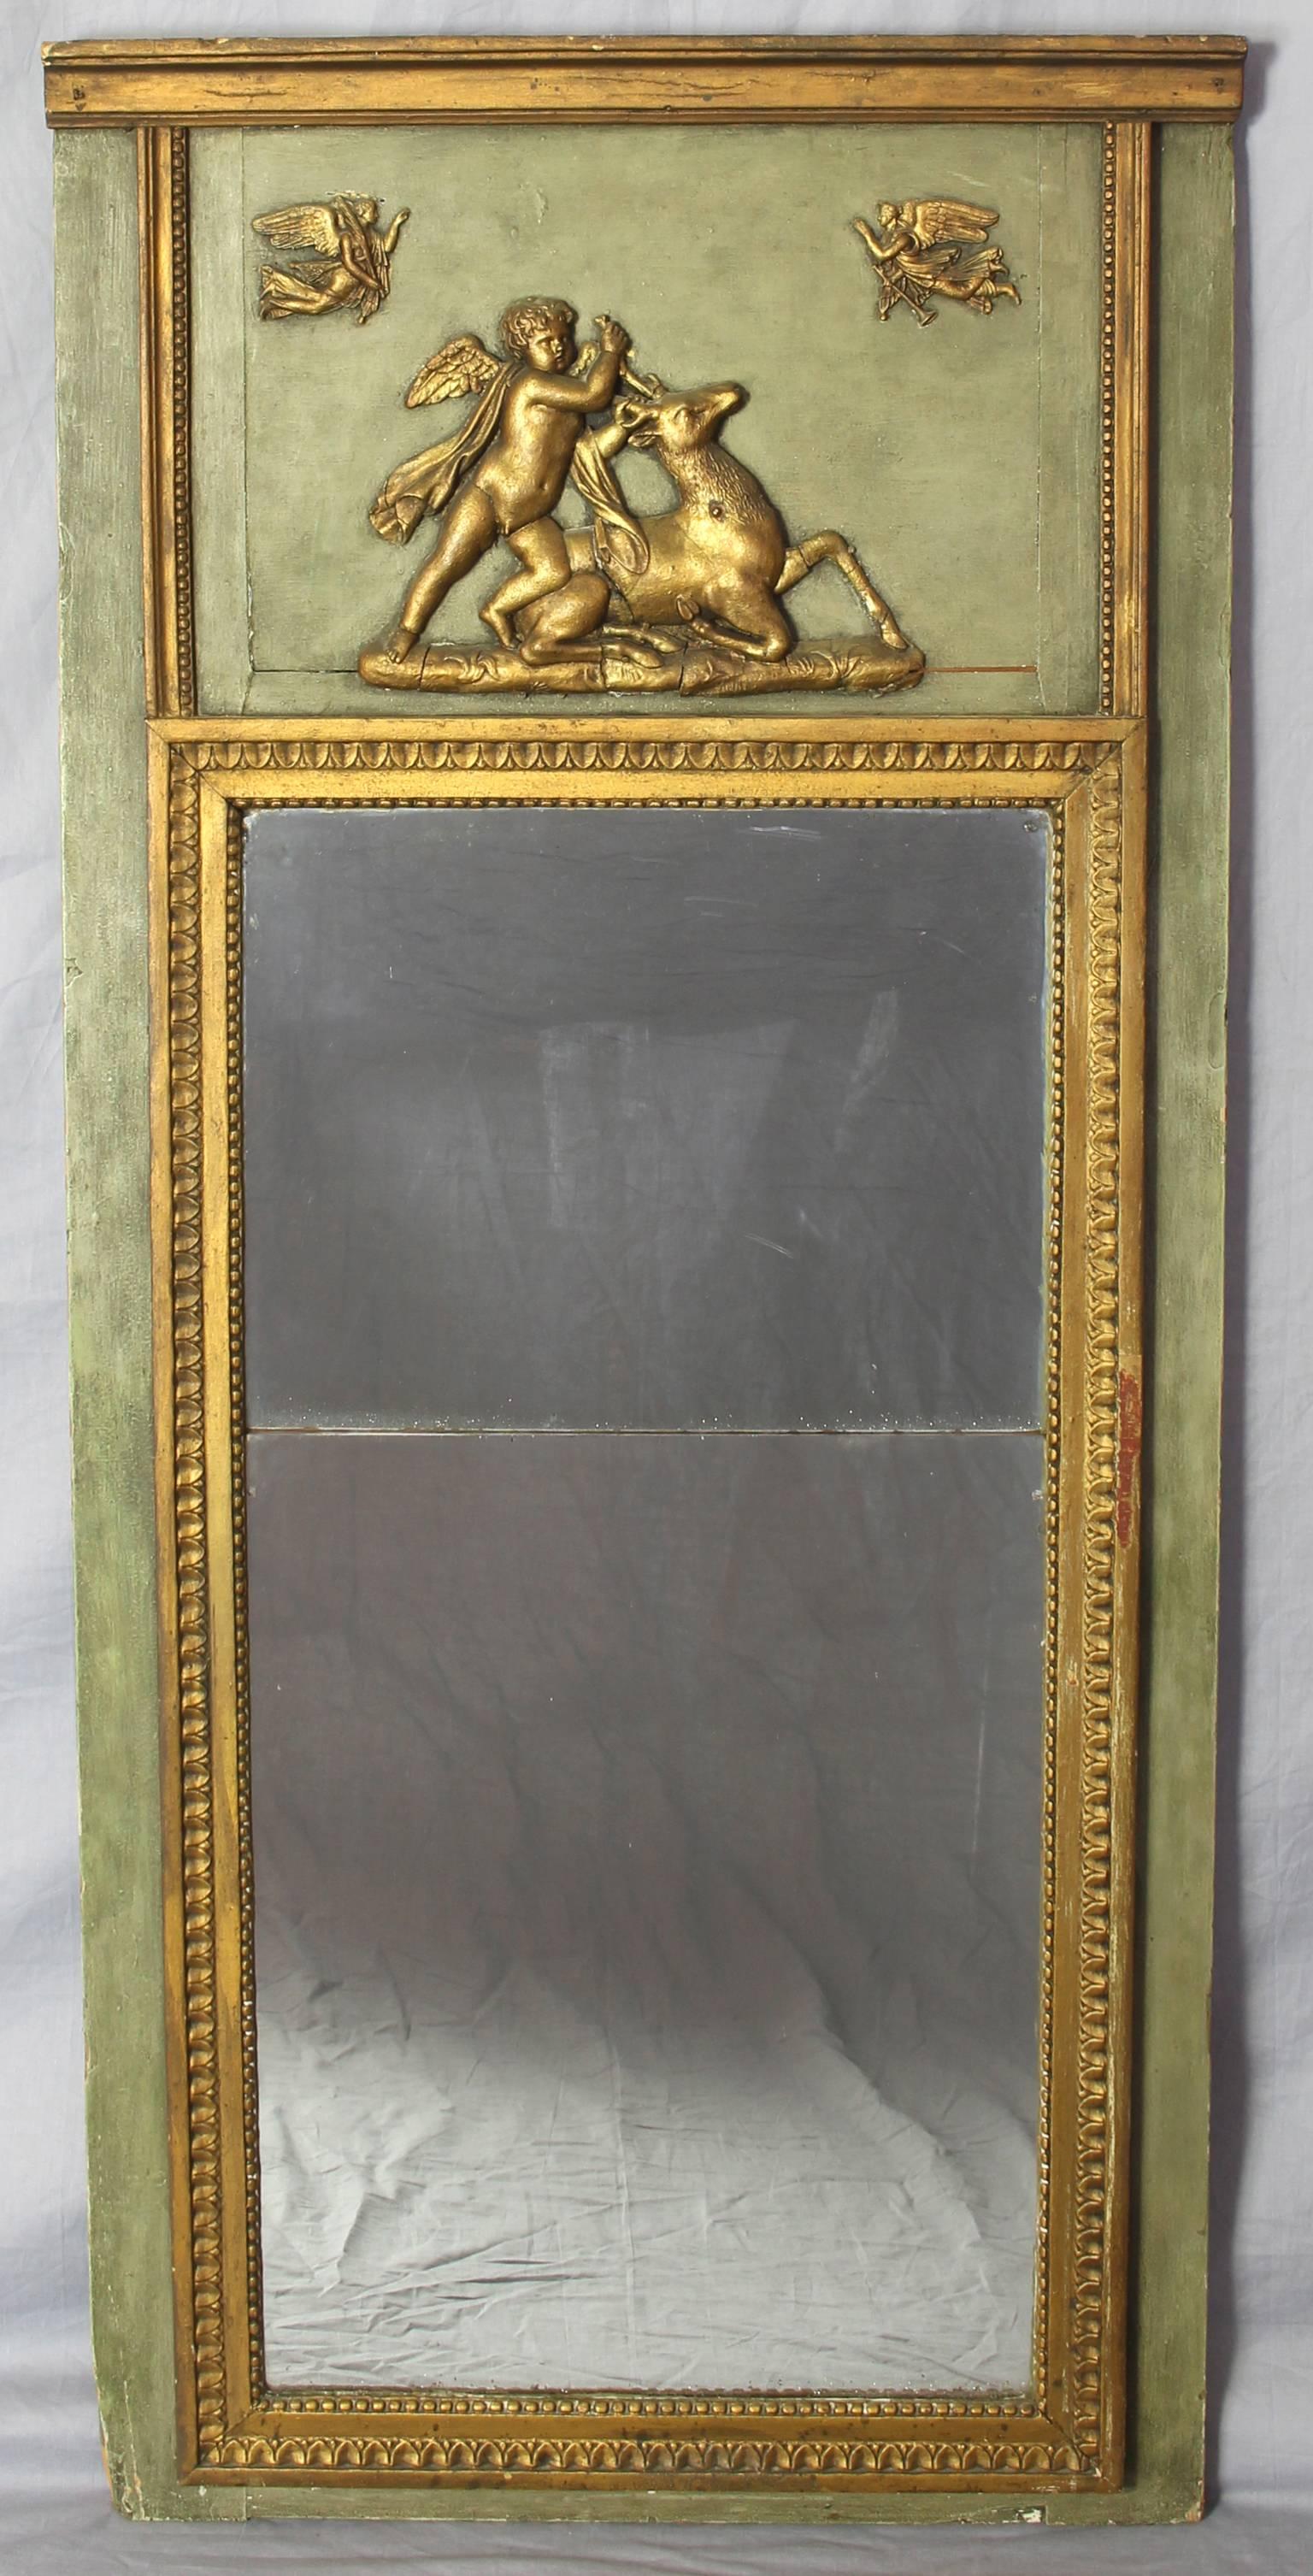 An early 19th century French green paint and gilt decorated mirror with original glass, depicting classical motifs.